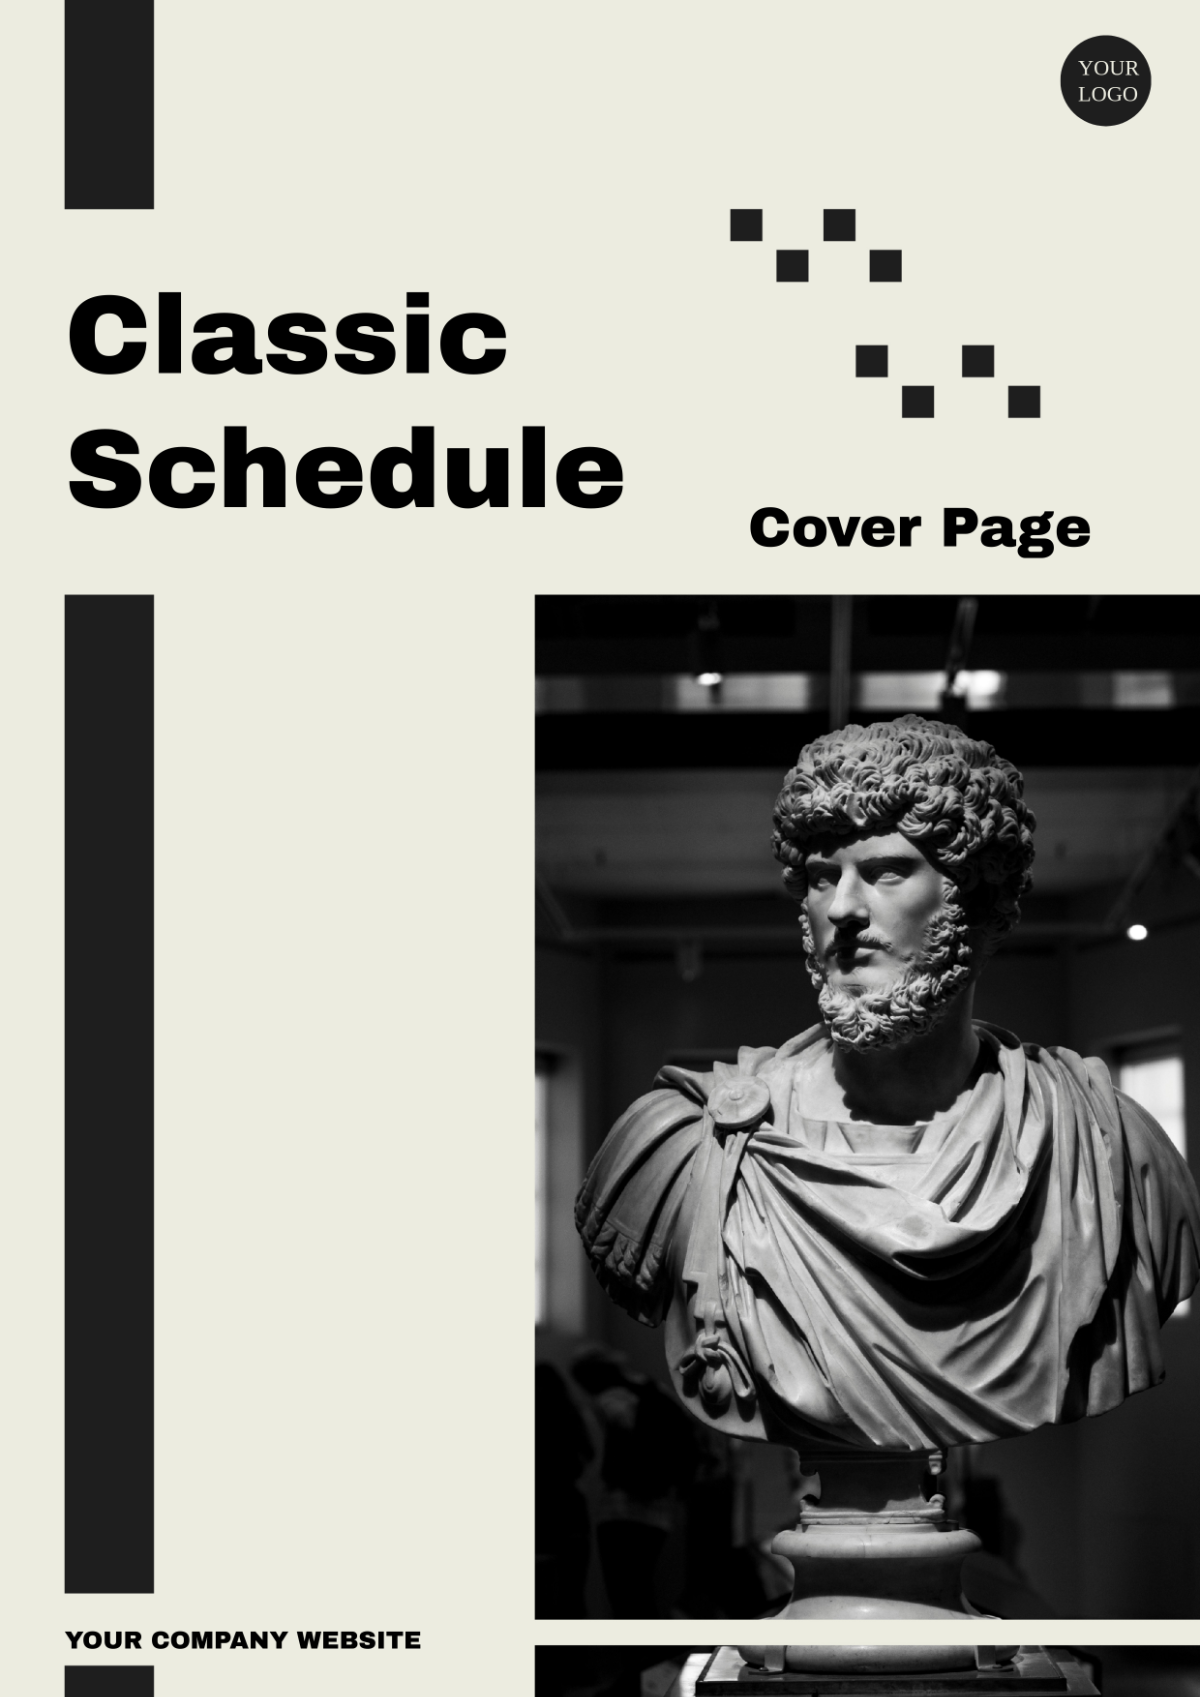 Classic Schedule Cover Page Template